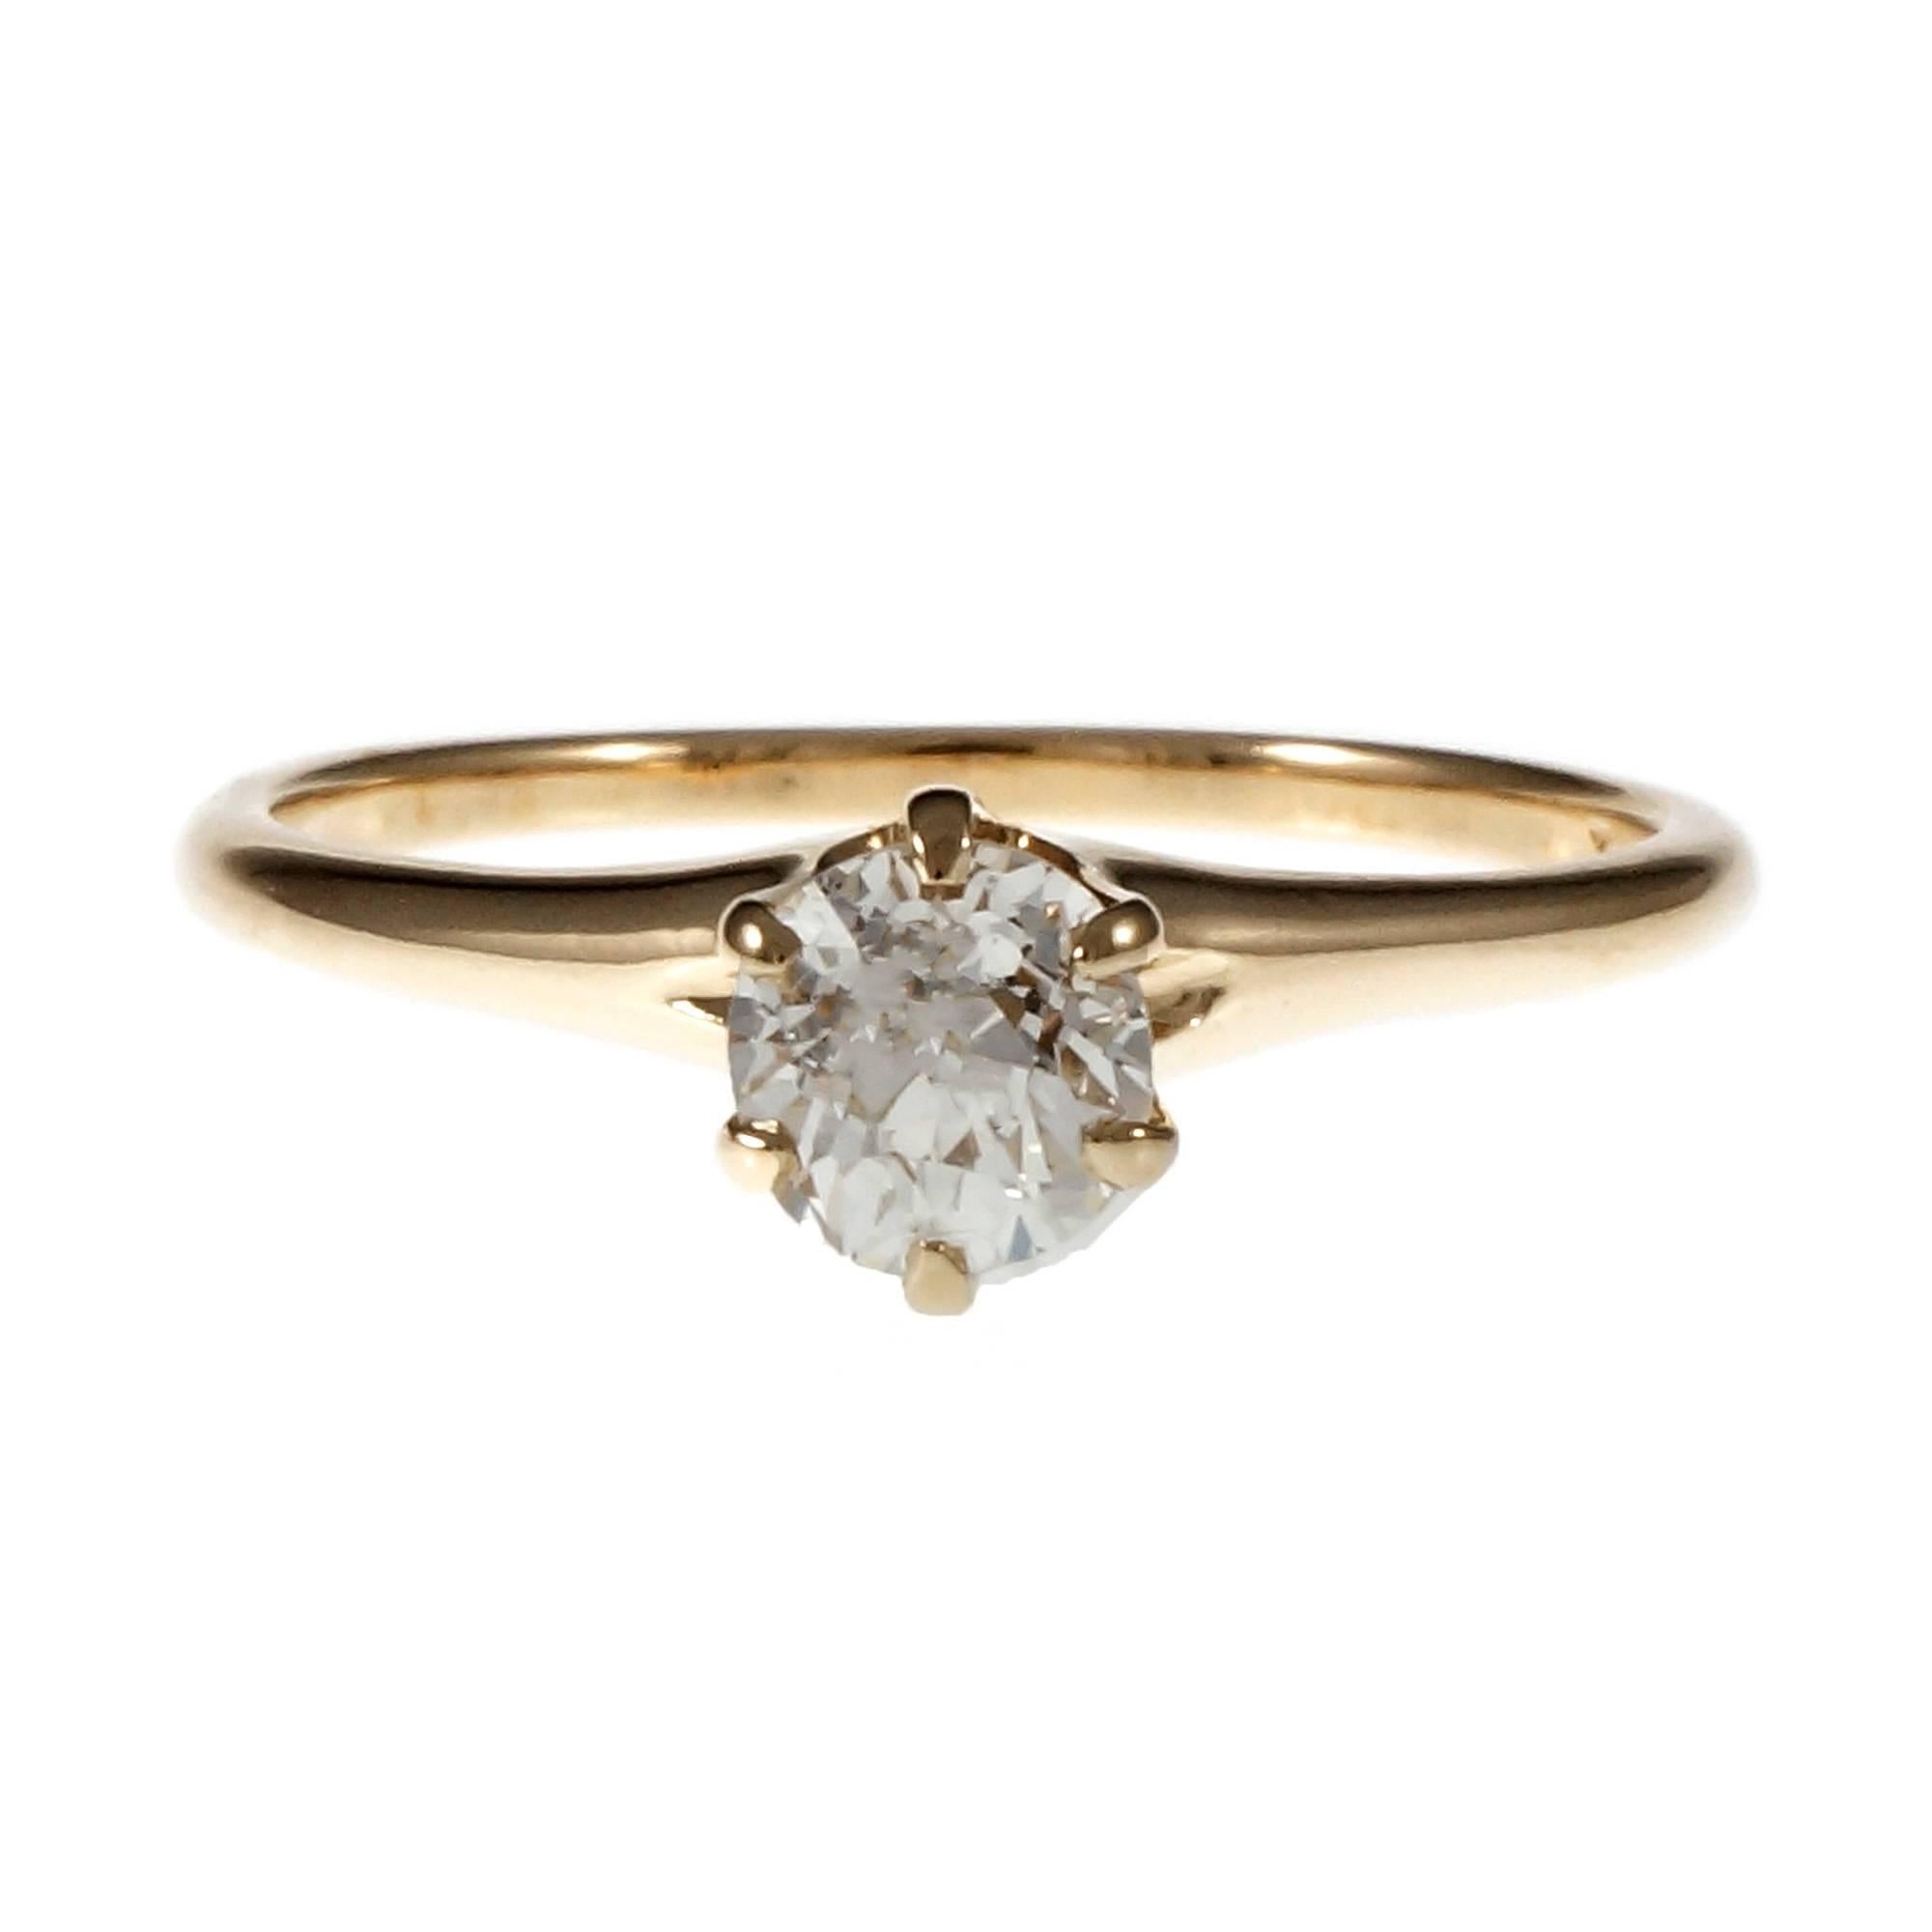 Old European Cut Victorian Solitaire Diamond Engagement Ring